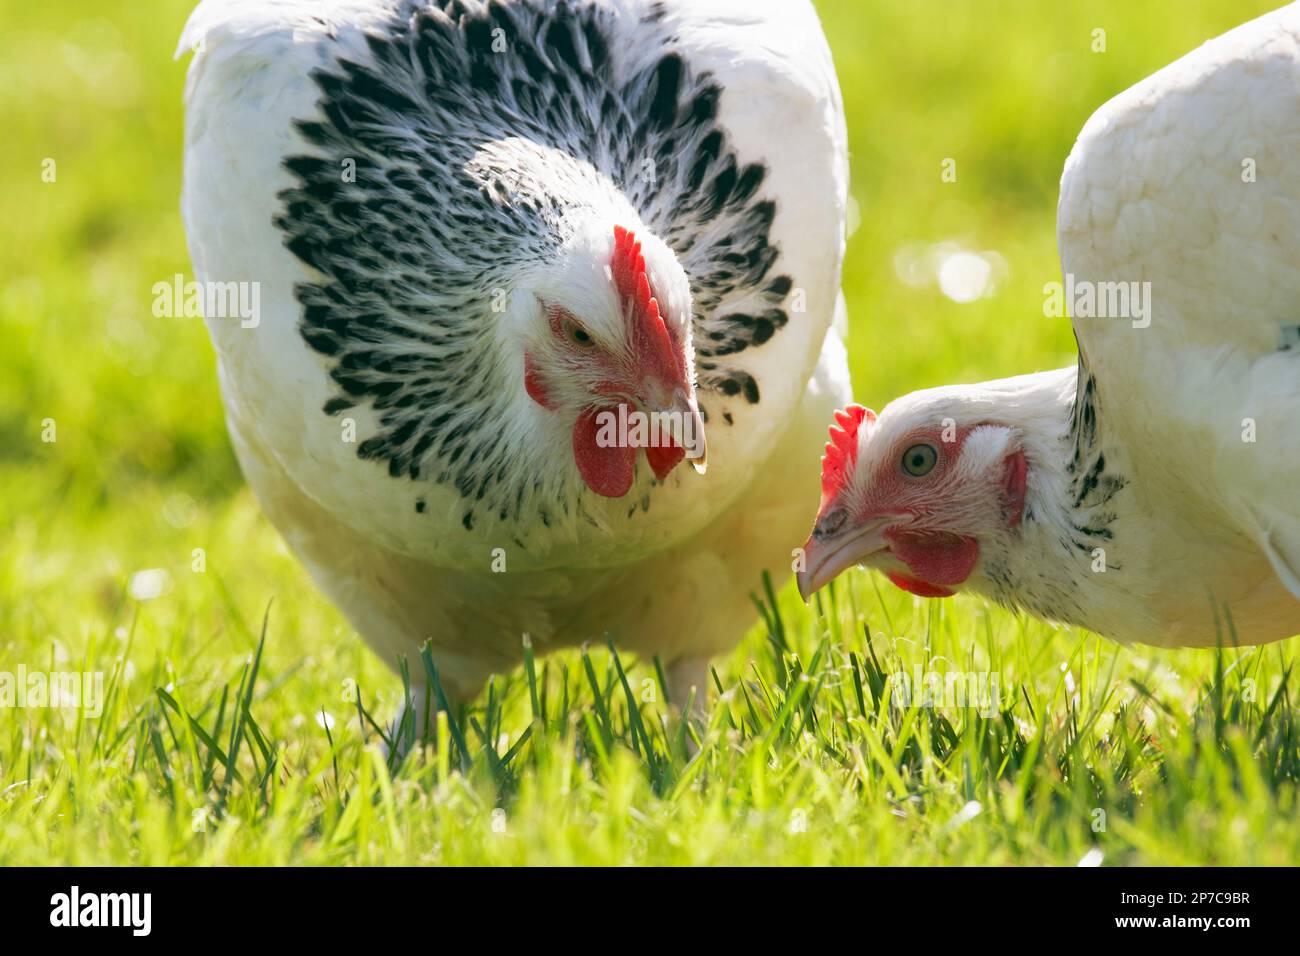 Light Sussex. Two hens at grass free range egg layers. Lays 240 brown eggs per year.  Dual purpose bird and can press out at 8lbs in weight. Stock Photo